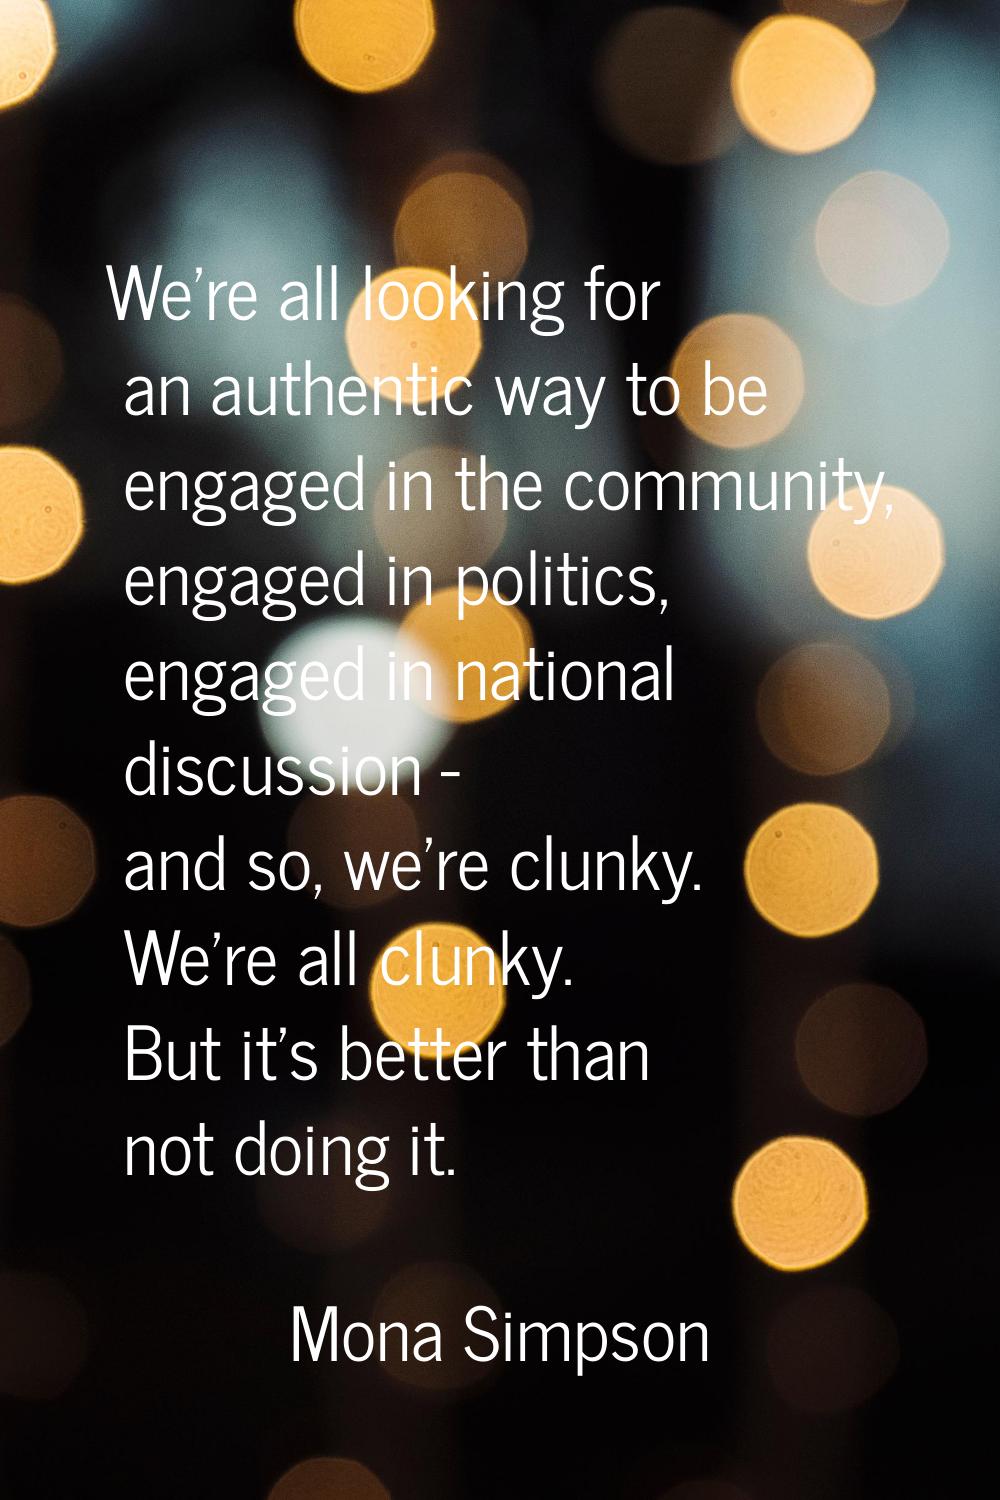 We're all looking for an authentic way to be engaged in the community, engaged in politics, engaged